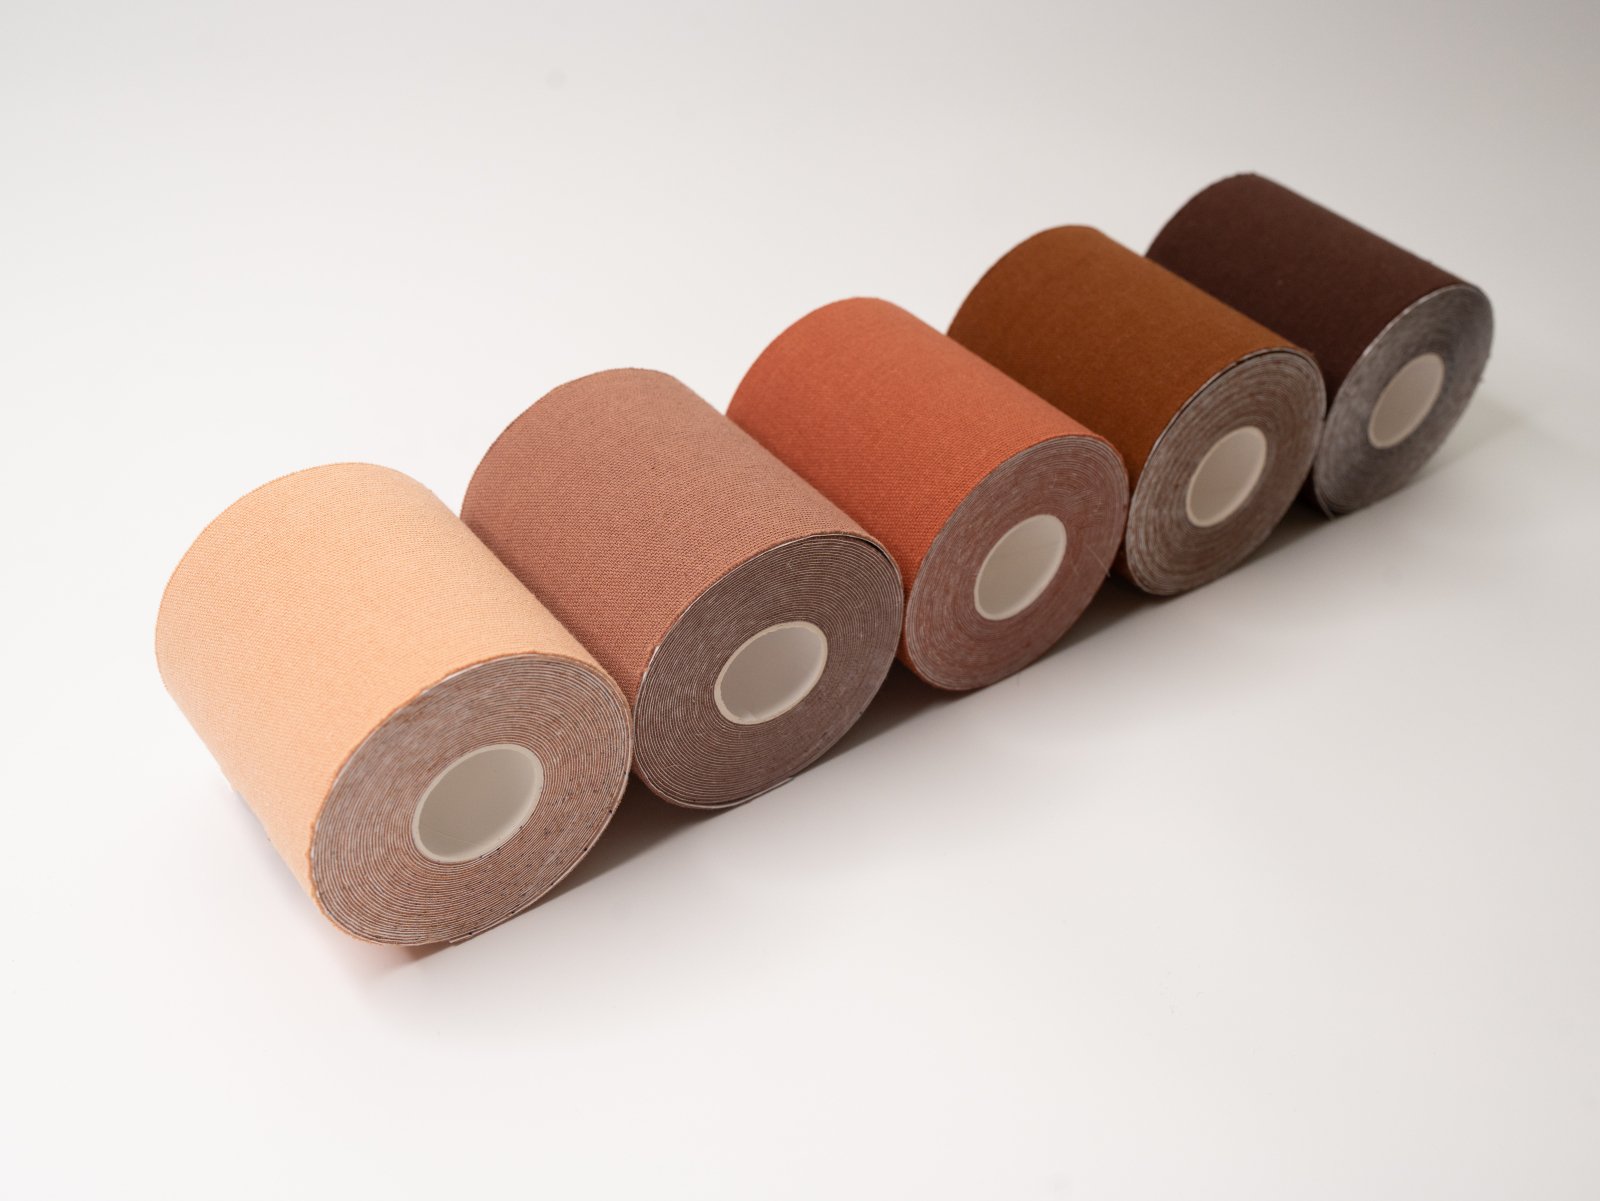 Rolls of nude-colored boob tape lined up for women of all colors and shades.